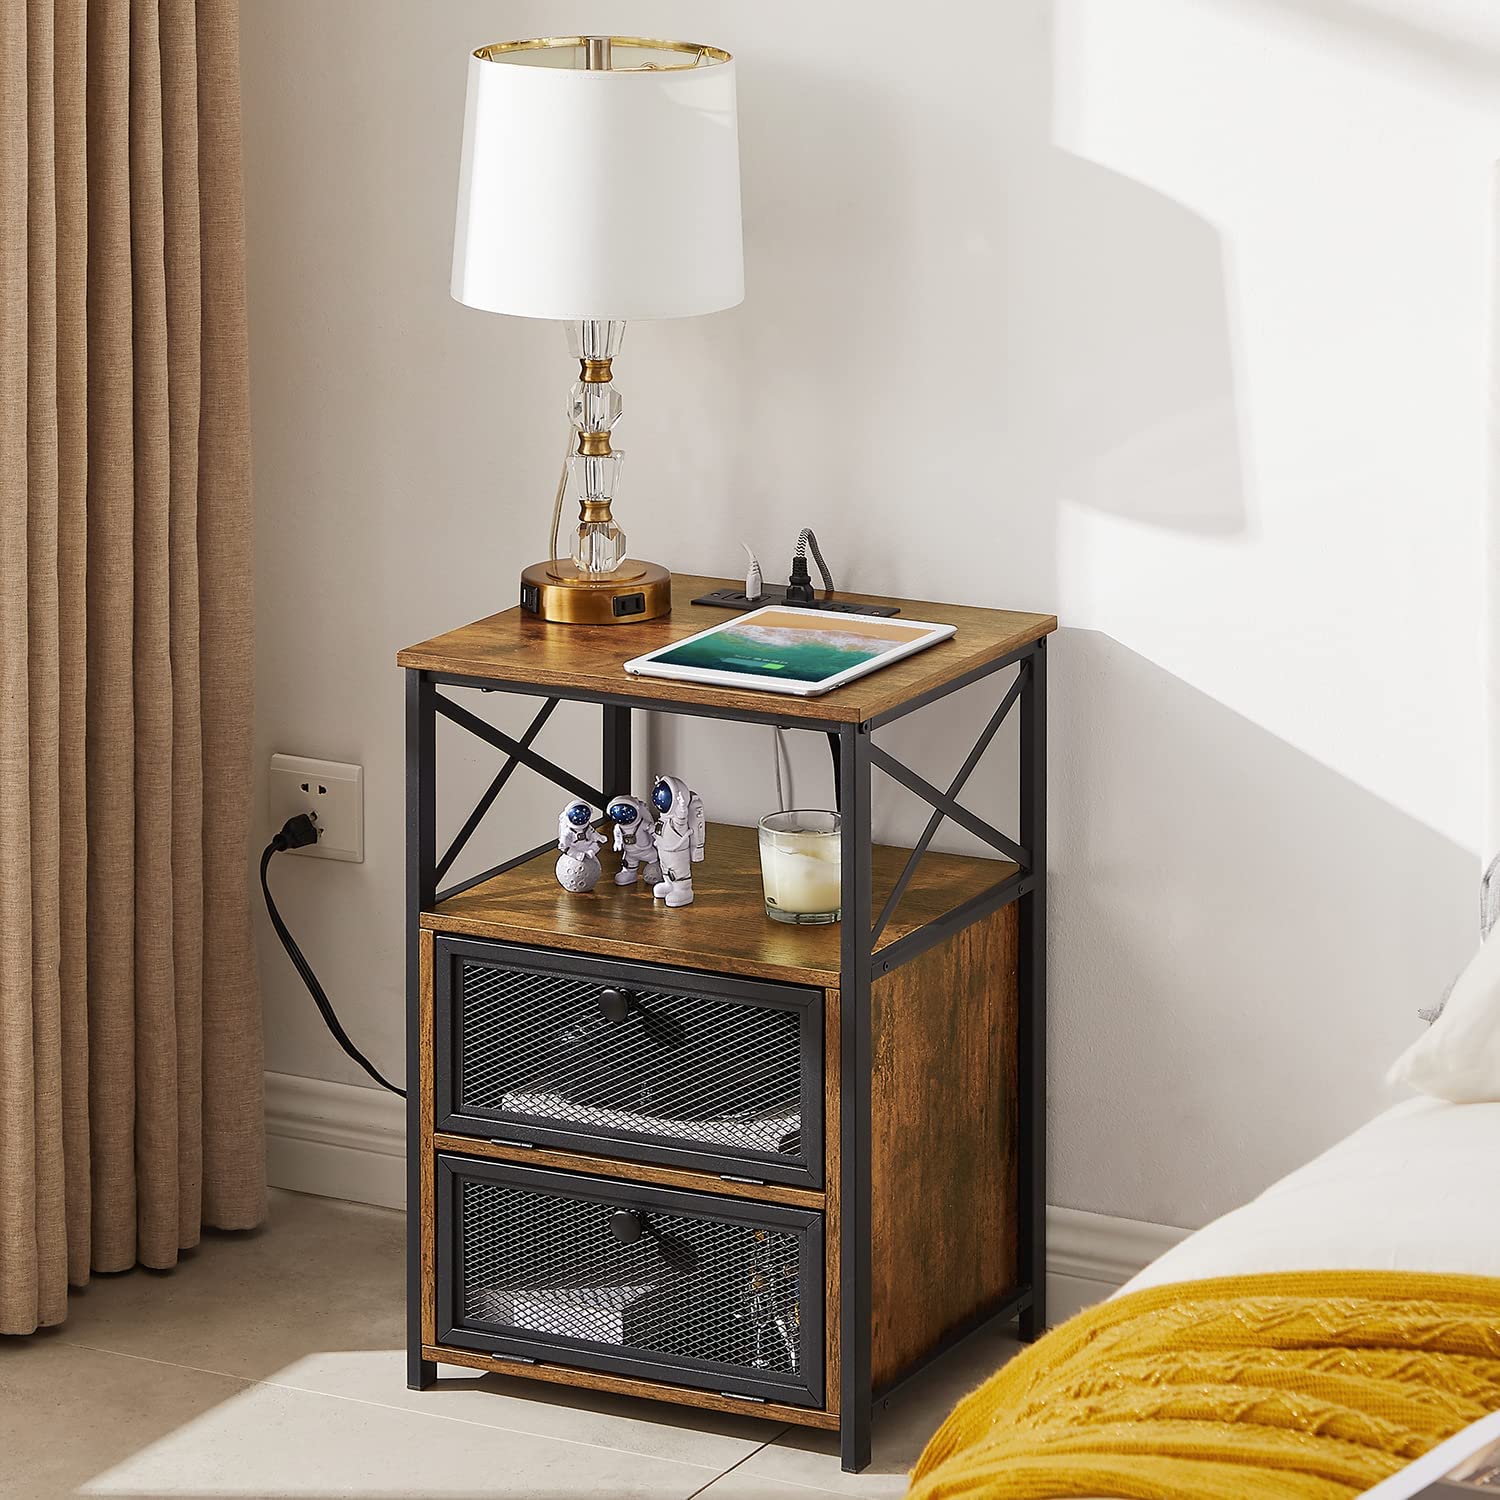 VECELO End Side Tables with Charging Station,Nightstand with 2 Flip Drawers and USB Ports & Power Outlets